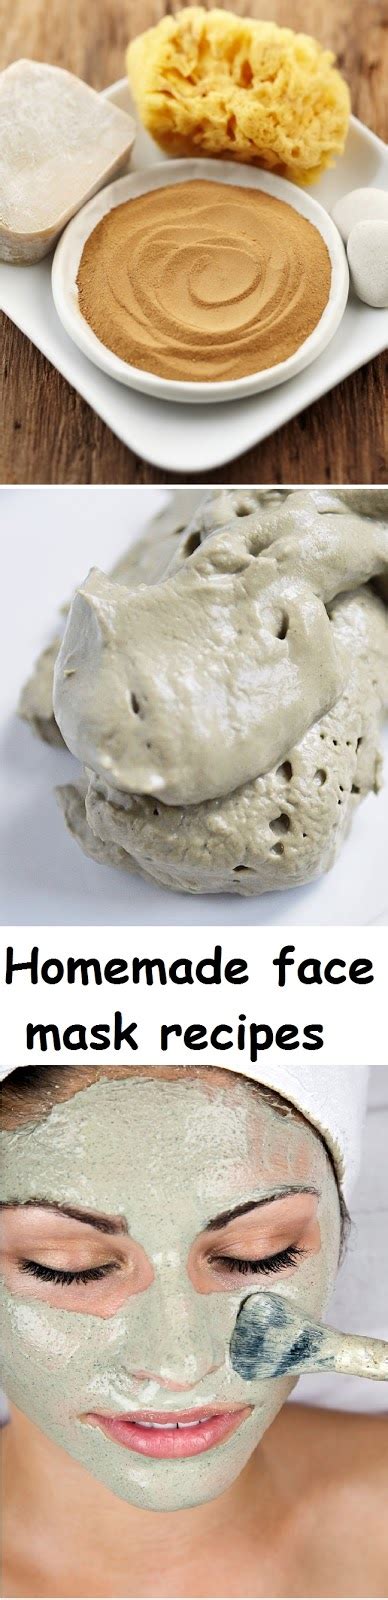 homemade face mask recipes my tips favorite